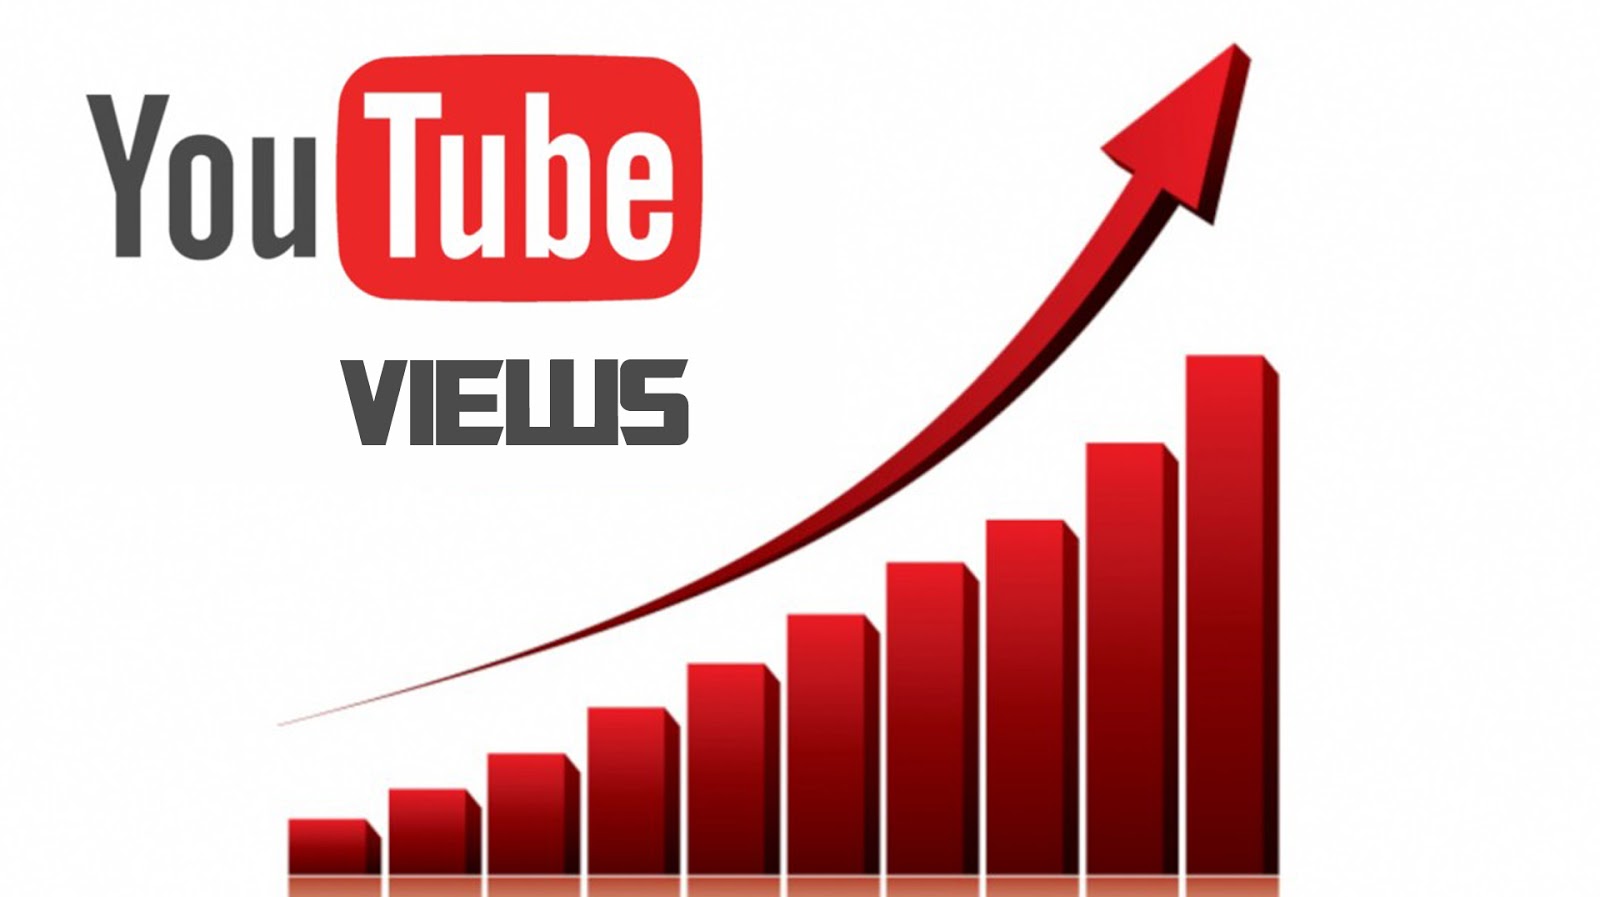 Steps to be followed for buying YouTube views from an online site